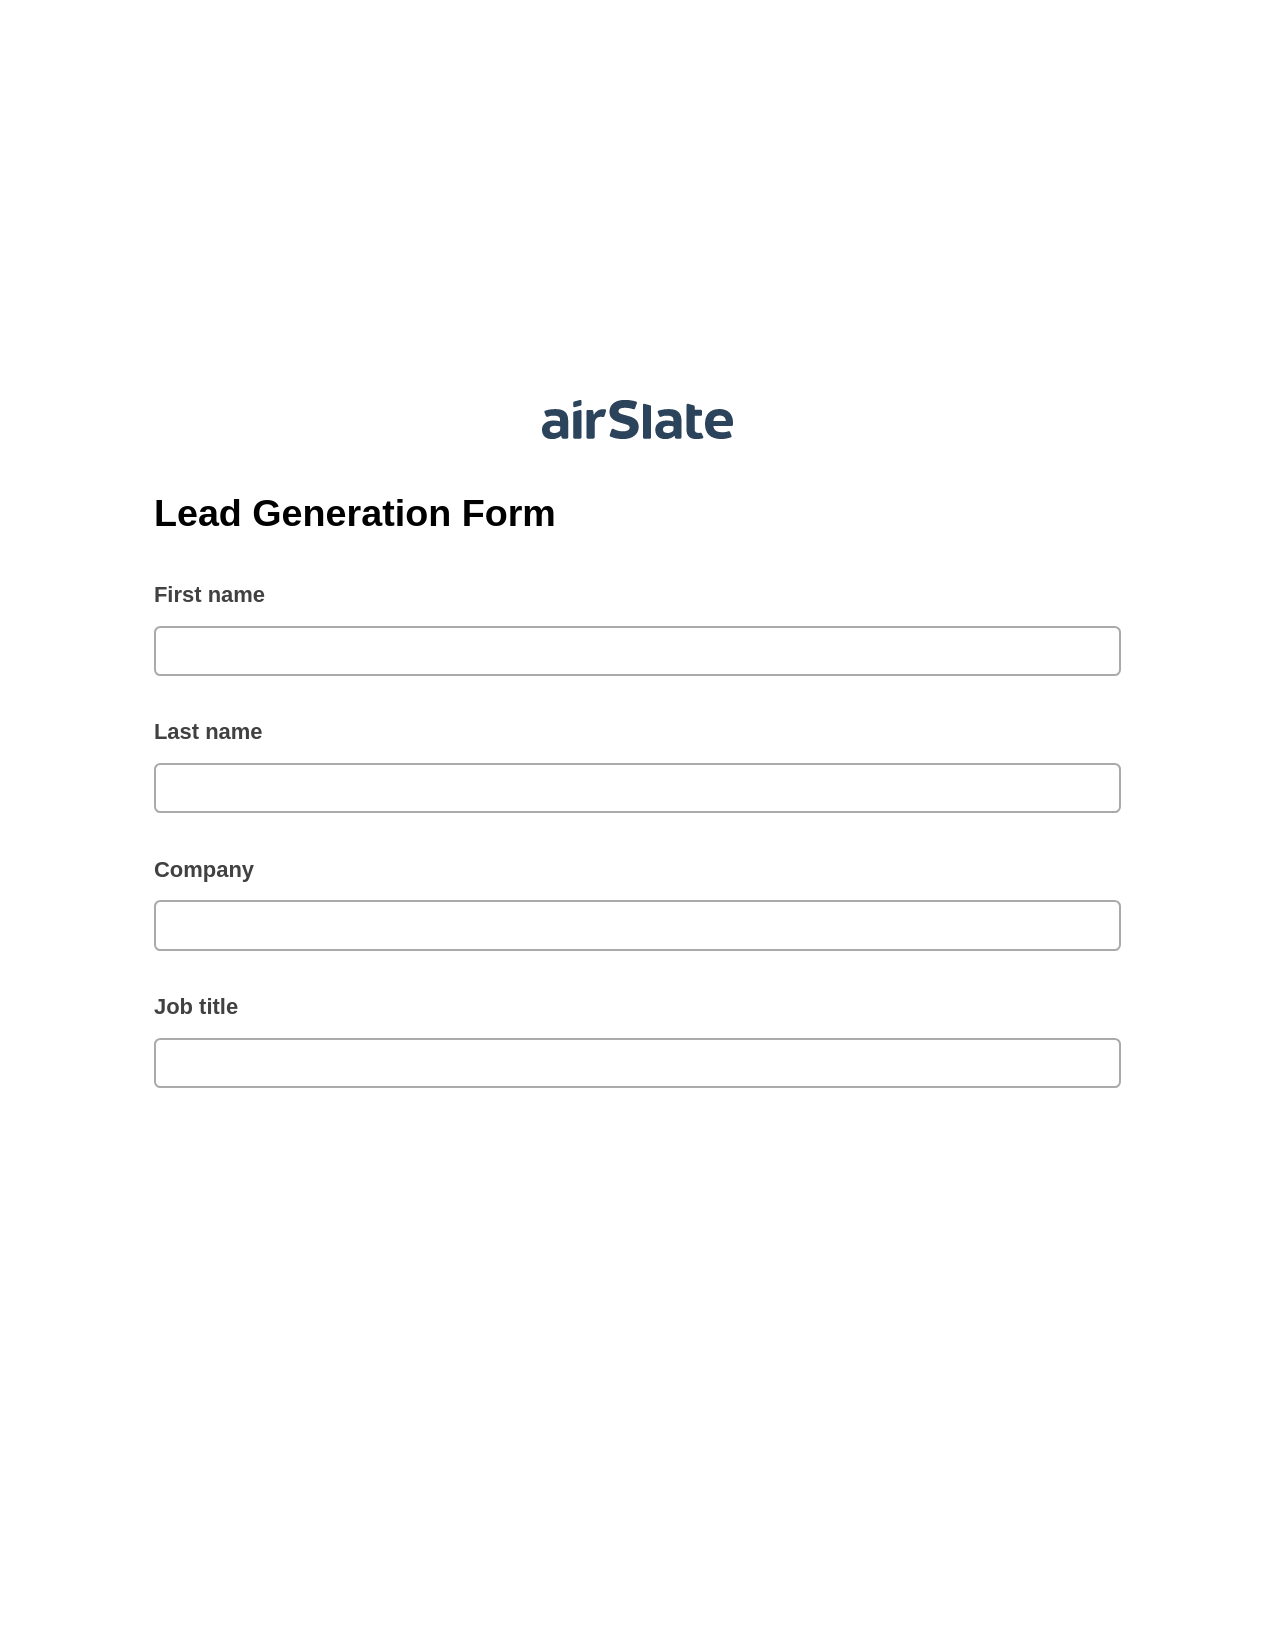 Lead Generation Form Pre-fill from MS Dynamics 365 Records, Send a Slate to MS Dynamics 365 Contact Bot, Export to Google Sheet Bot